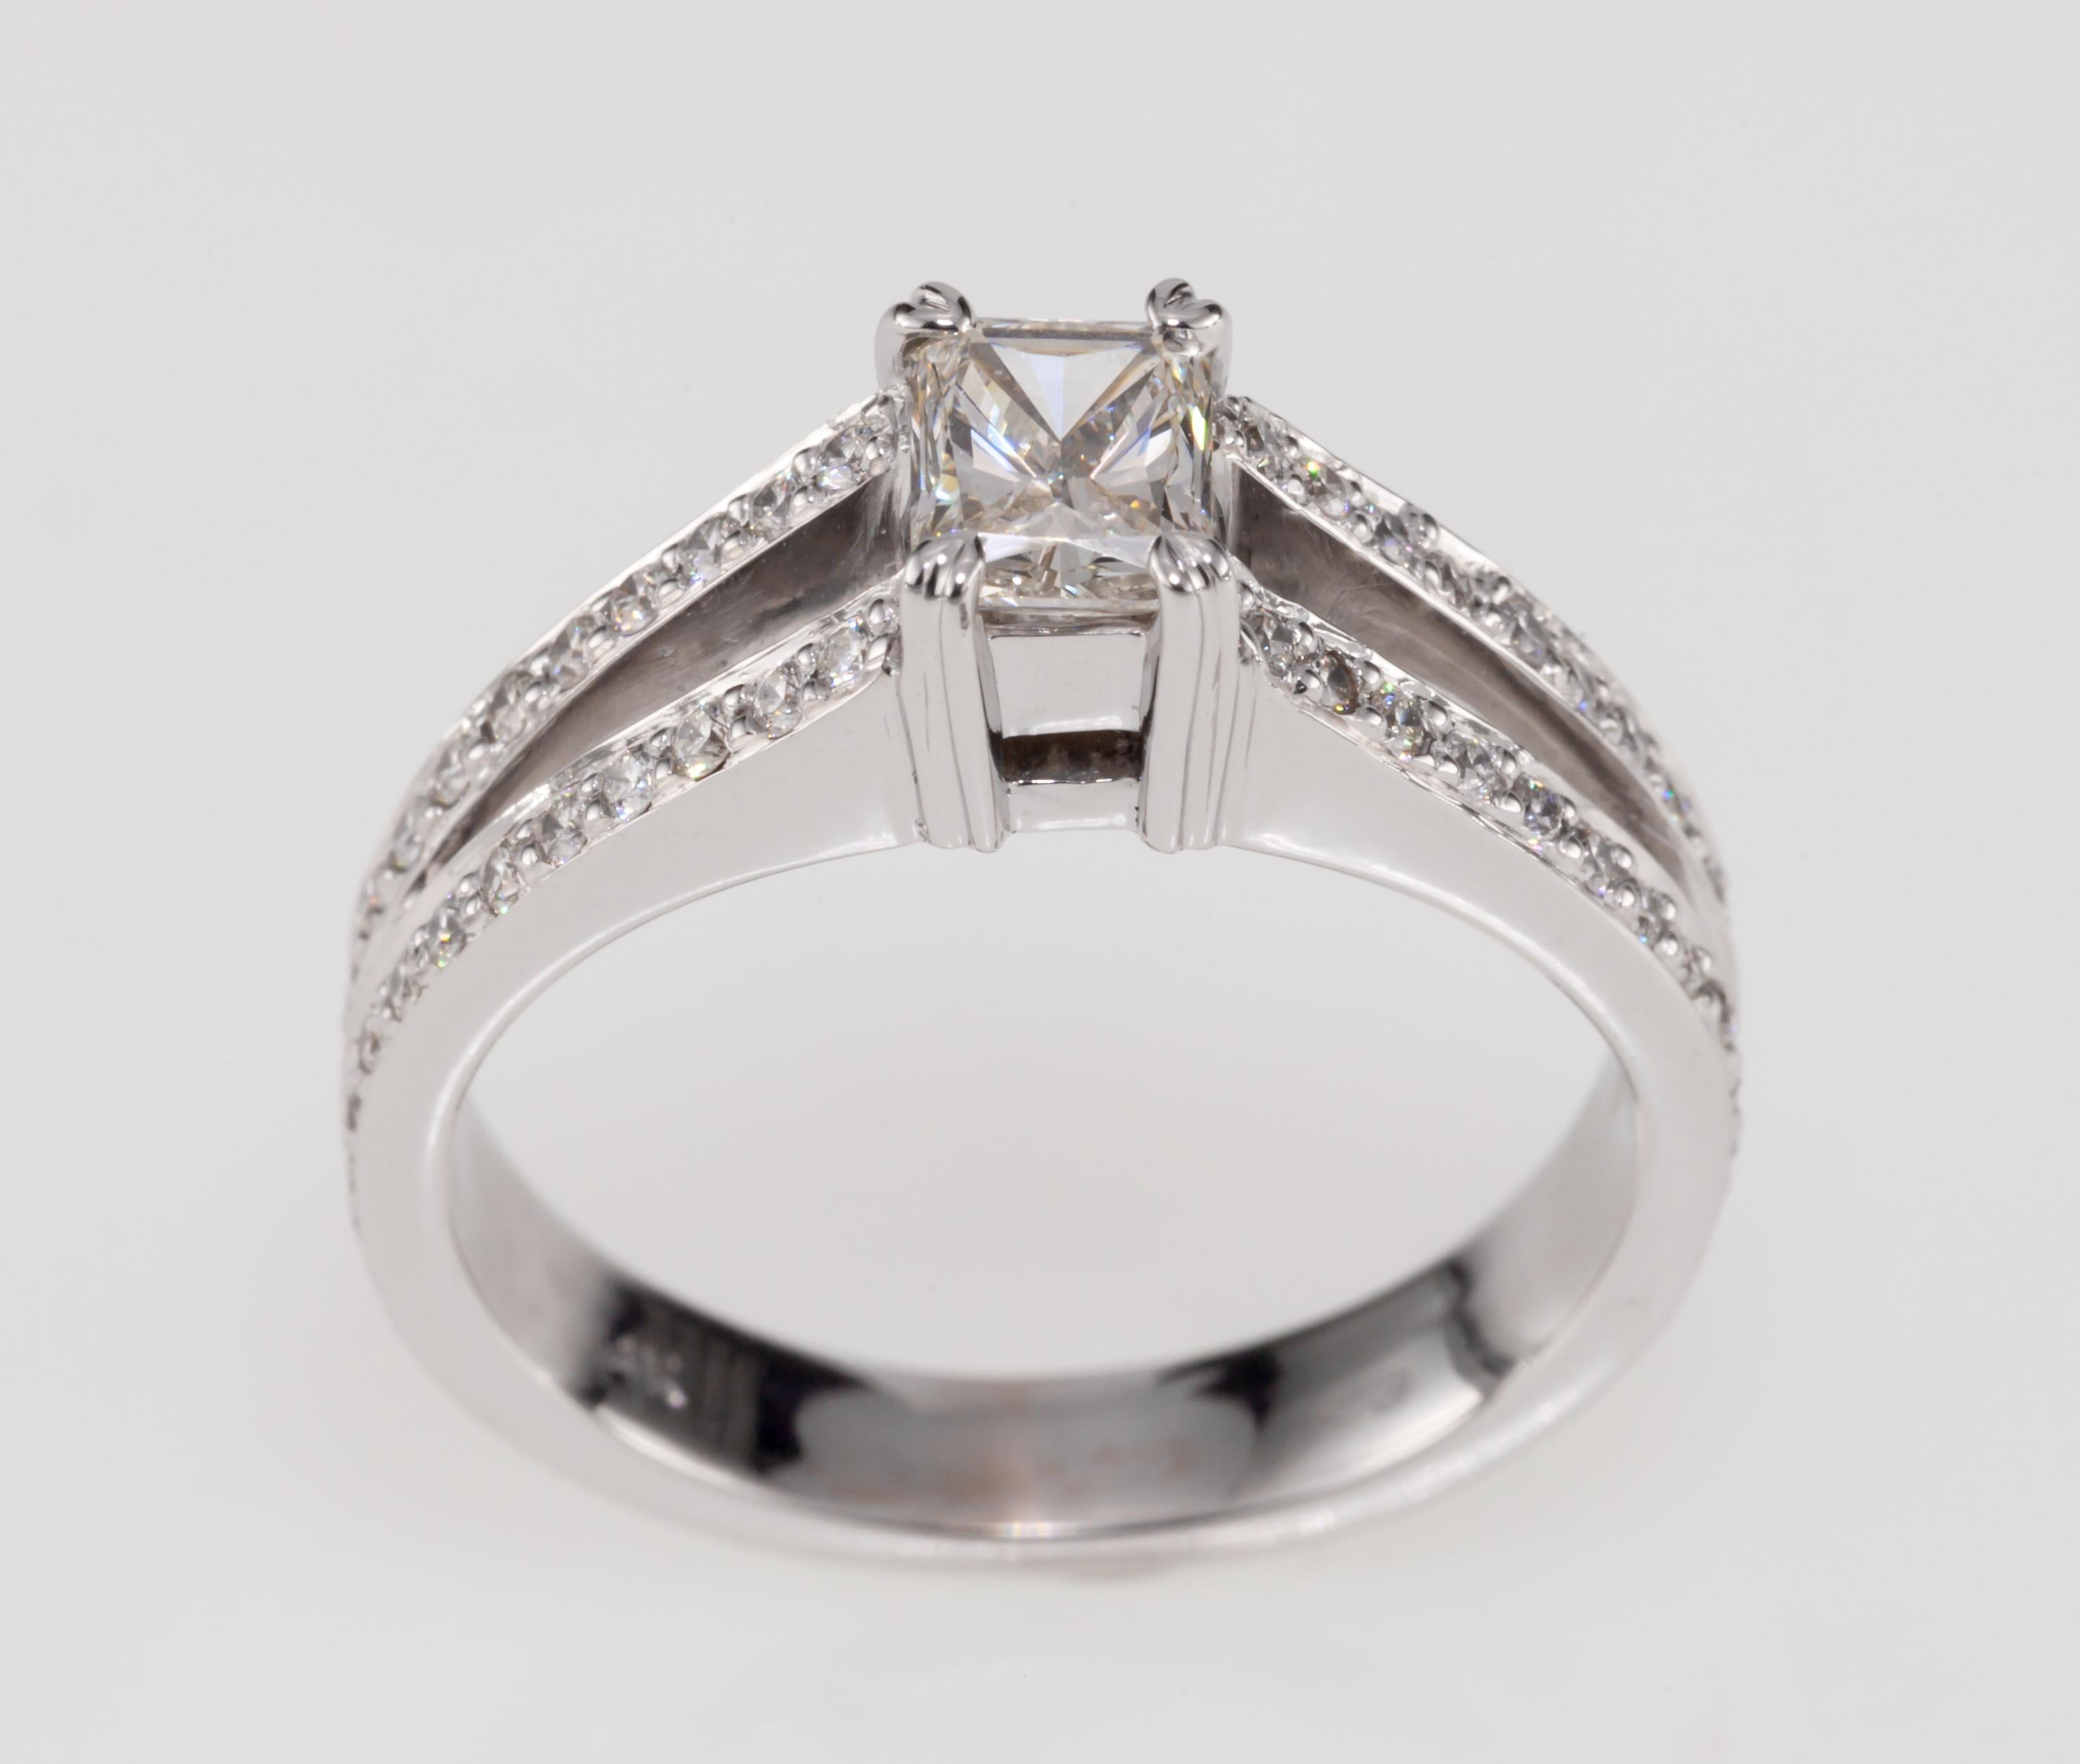 0.53 Carat Radiant Diamond Solitaire Ring with Accent Stones in White Gold 8